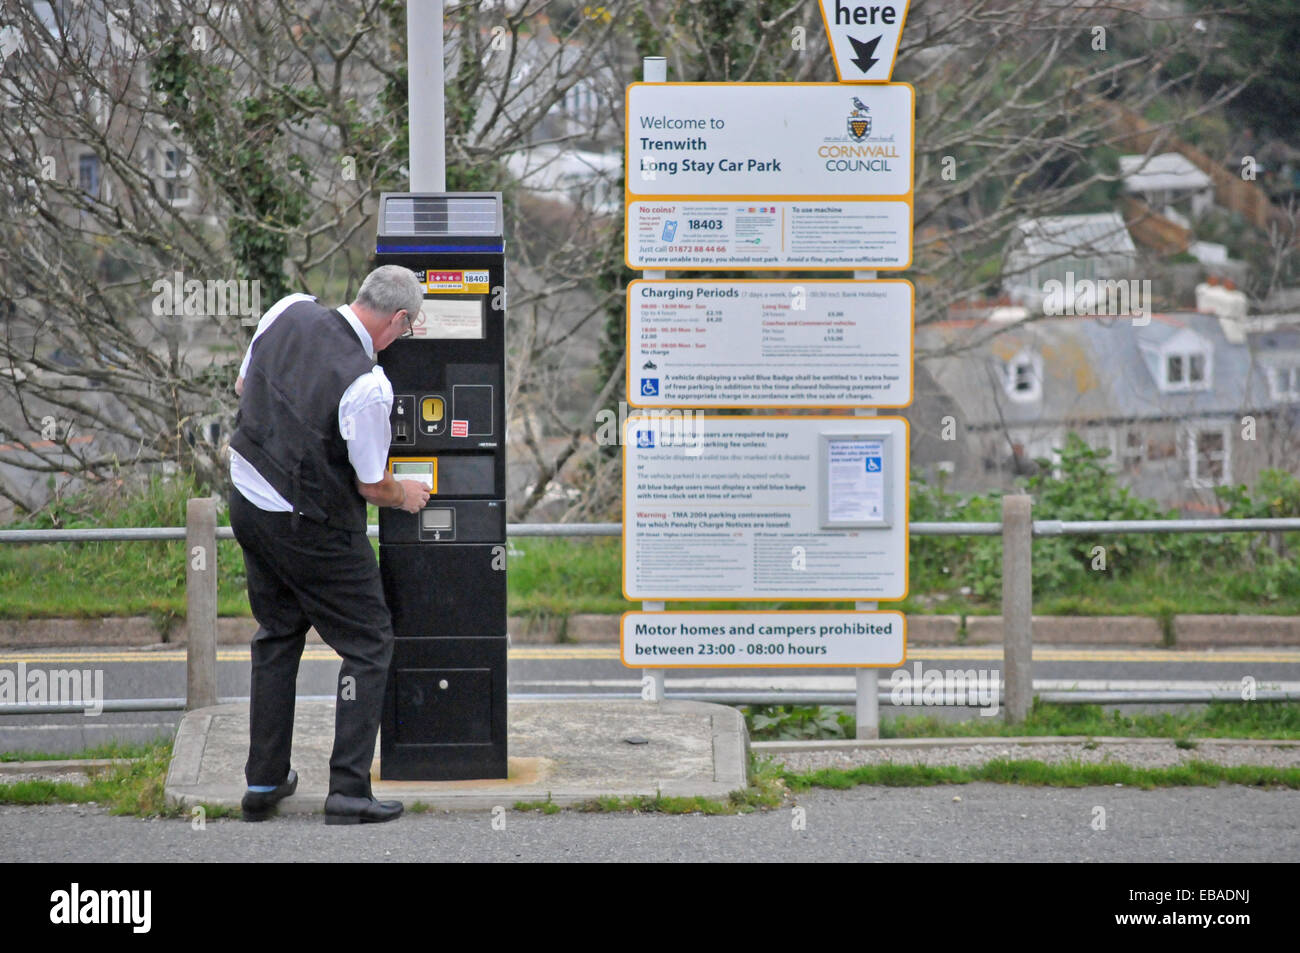 Buying a parking ticket in St Ives, Cornwall Stock Photo